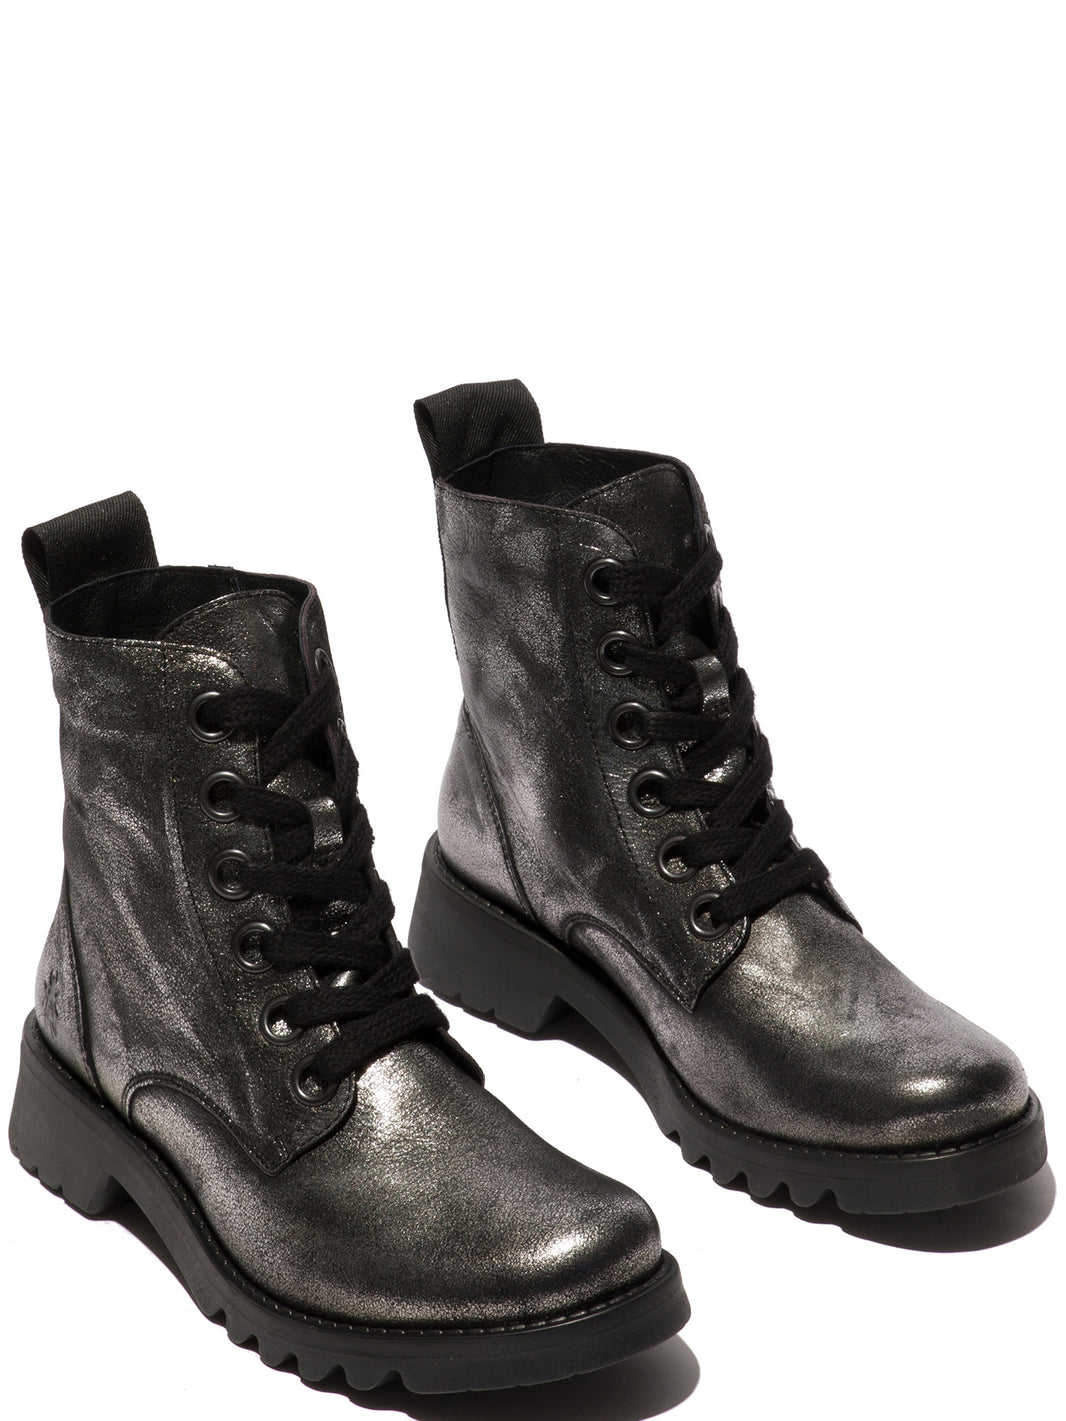 fly london ragi silver new winter collection 2023 leather boots £140 size 41,42 now £79.99